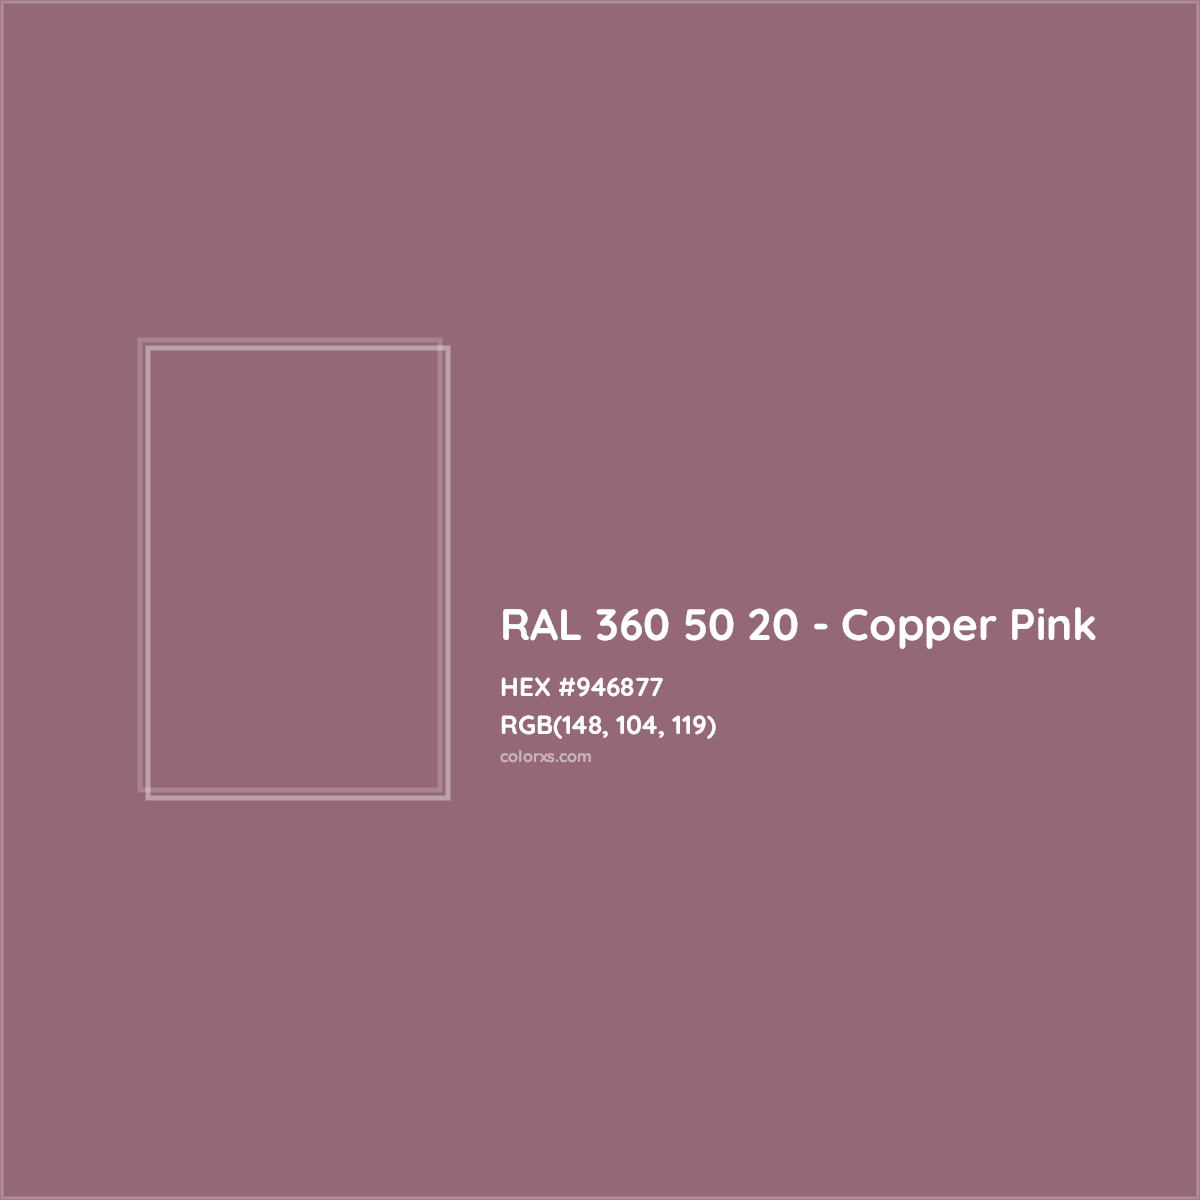 HEX #946877 RAL 360 50 20 - Copper Pink CMS RAL Design - Color Code